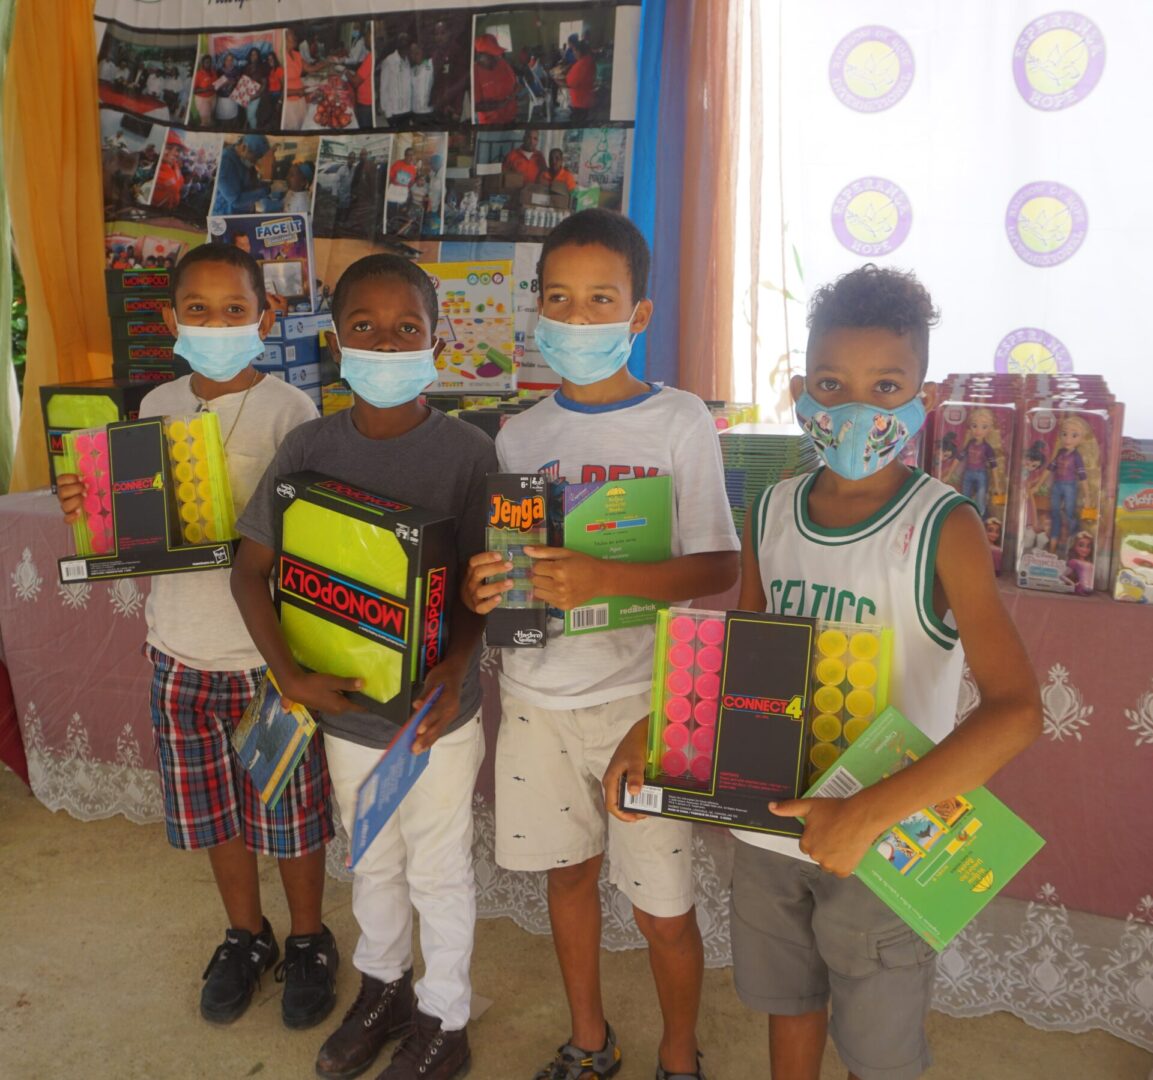 Four boys with masks holding toys in front of a table with books and toys, batch 4